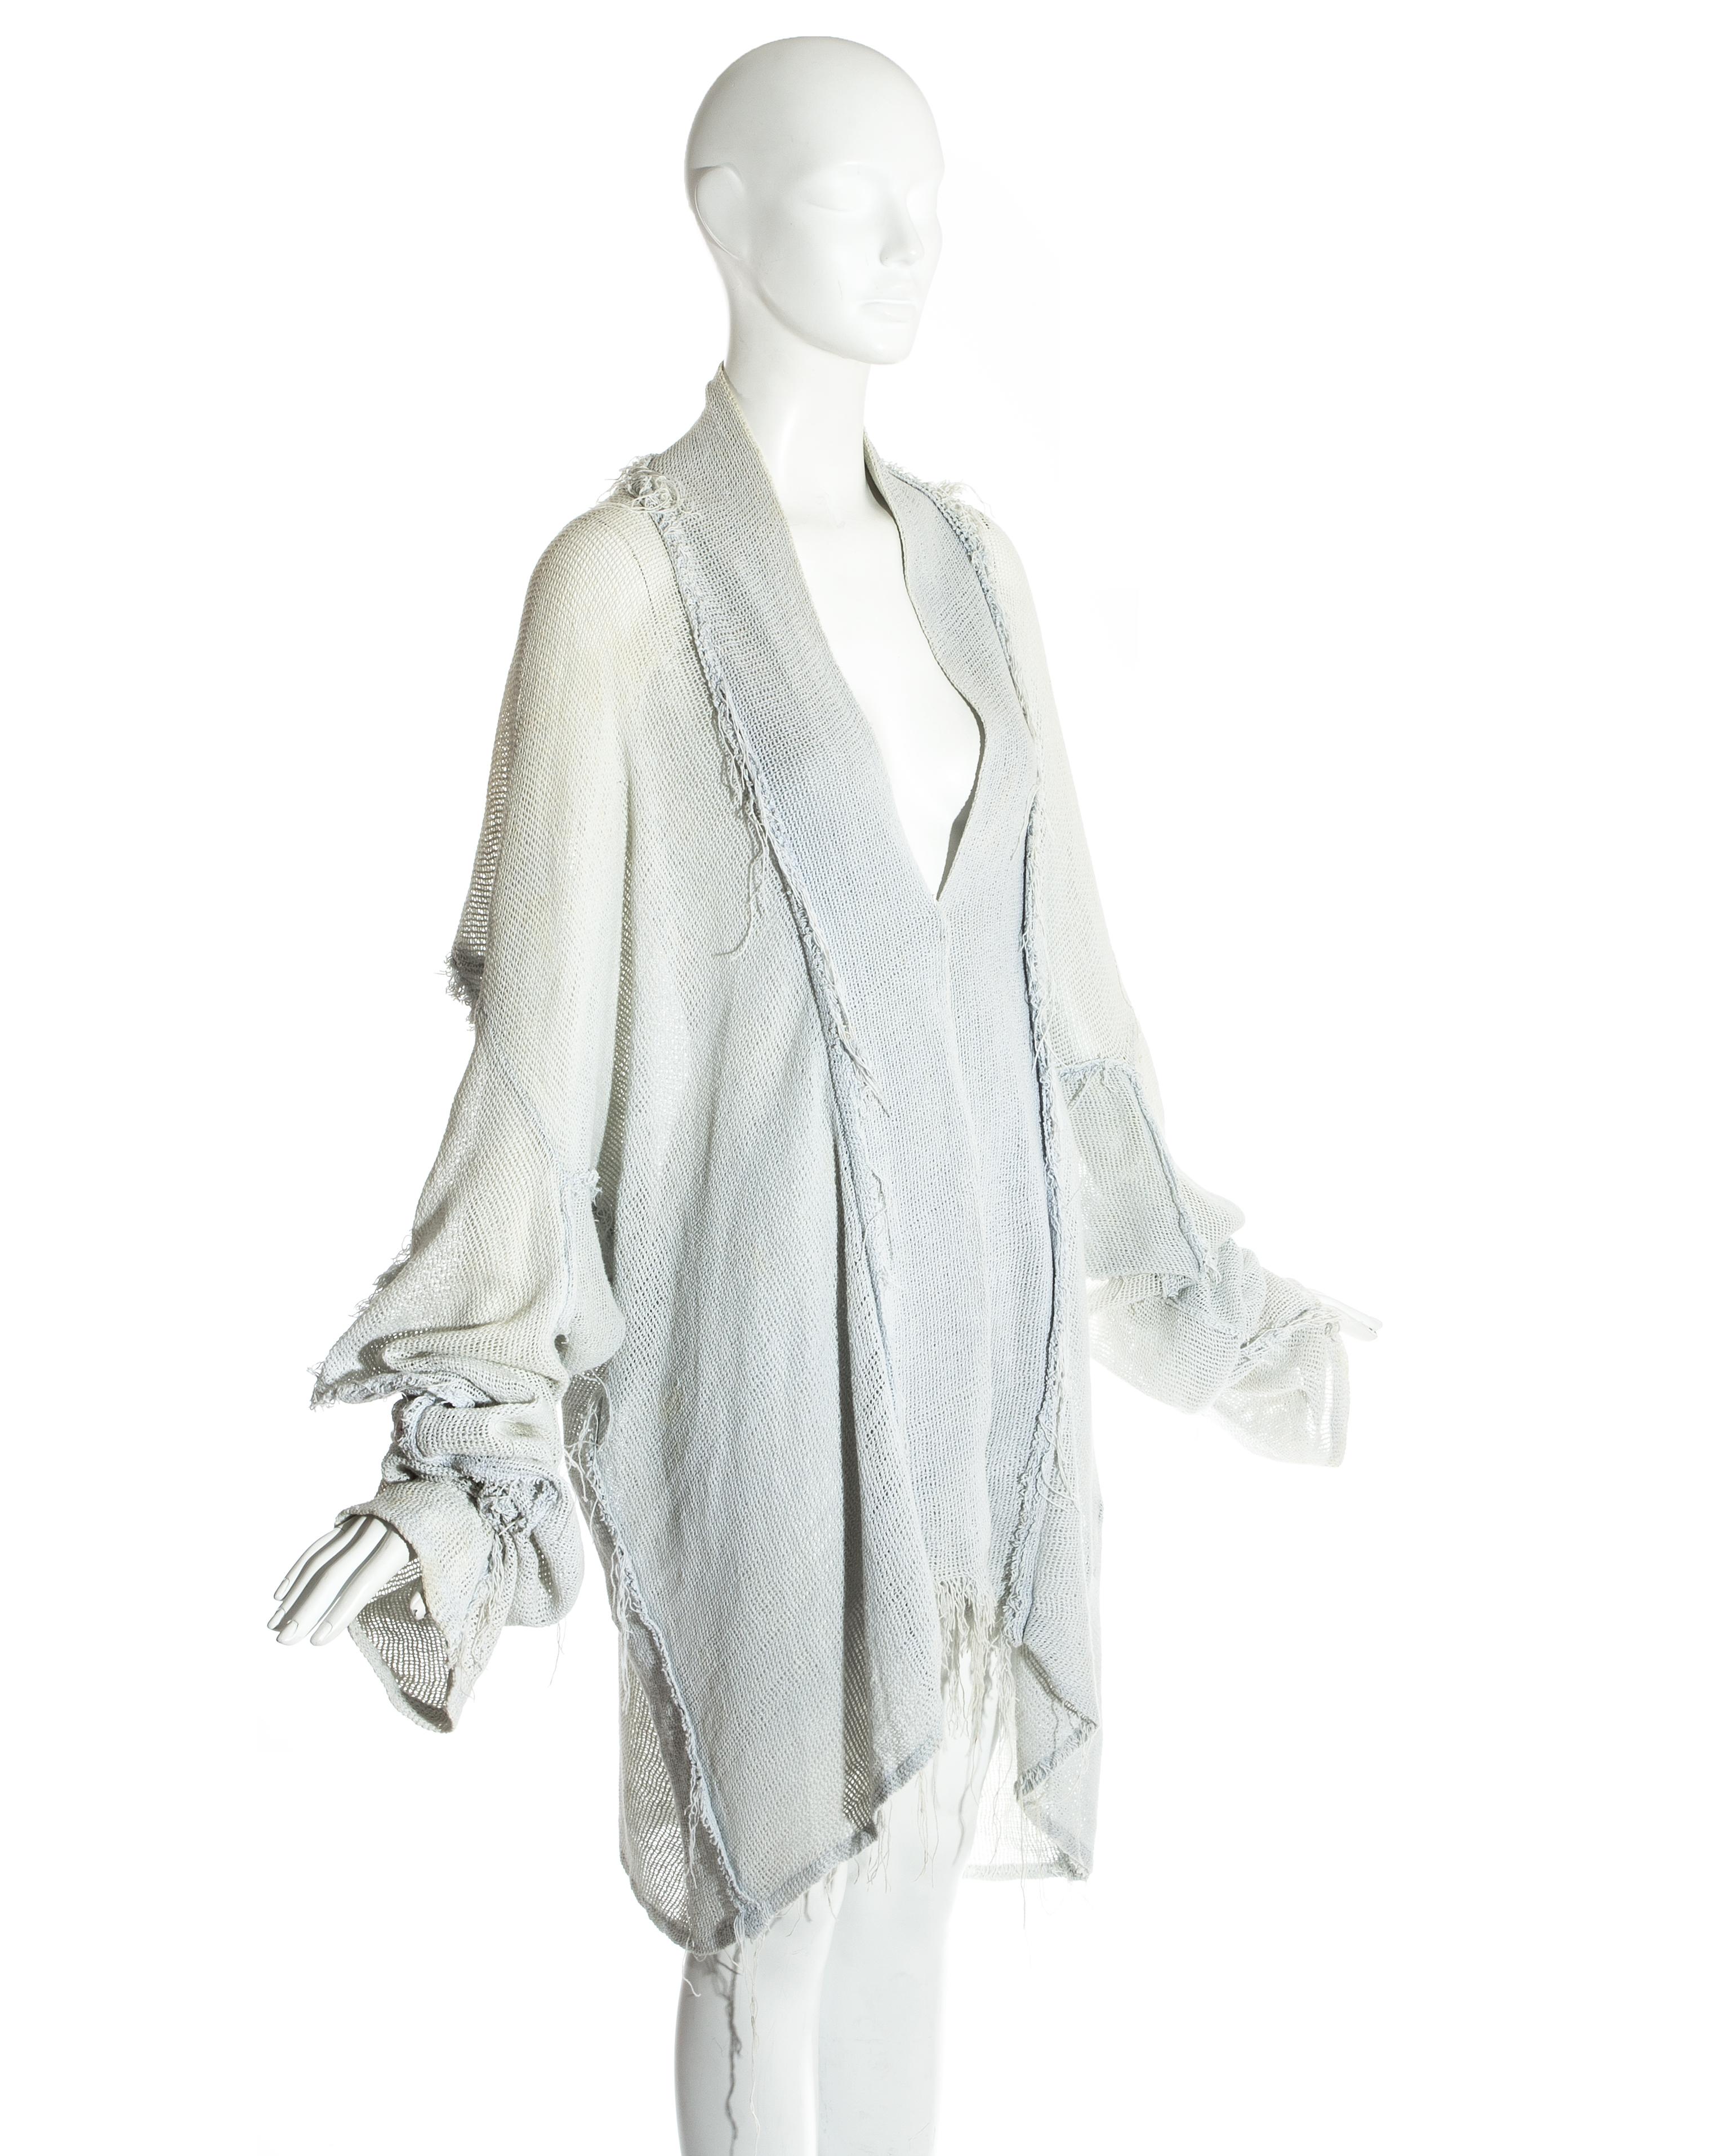 Worlds End dove grey cotton gauze oversized 'Punkature' jacket, ss 1983 In Good Condition For Sale In London, GB